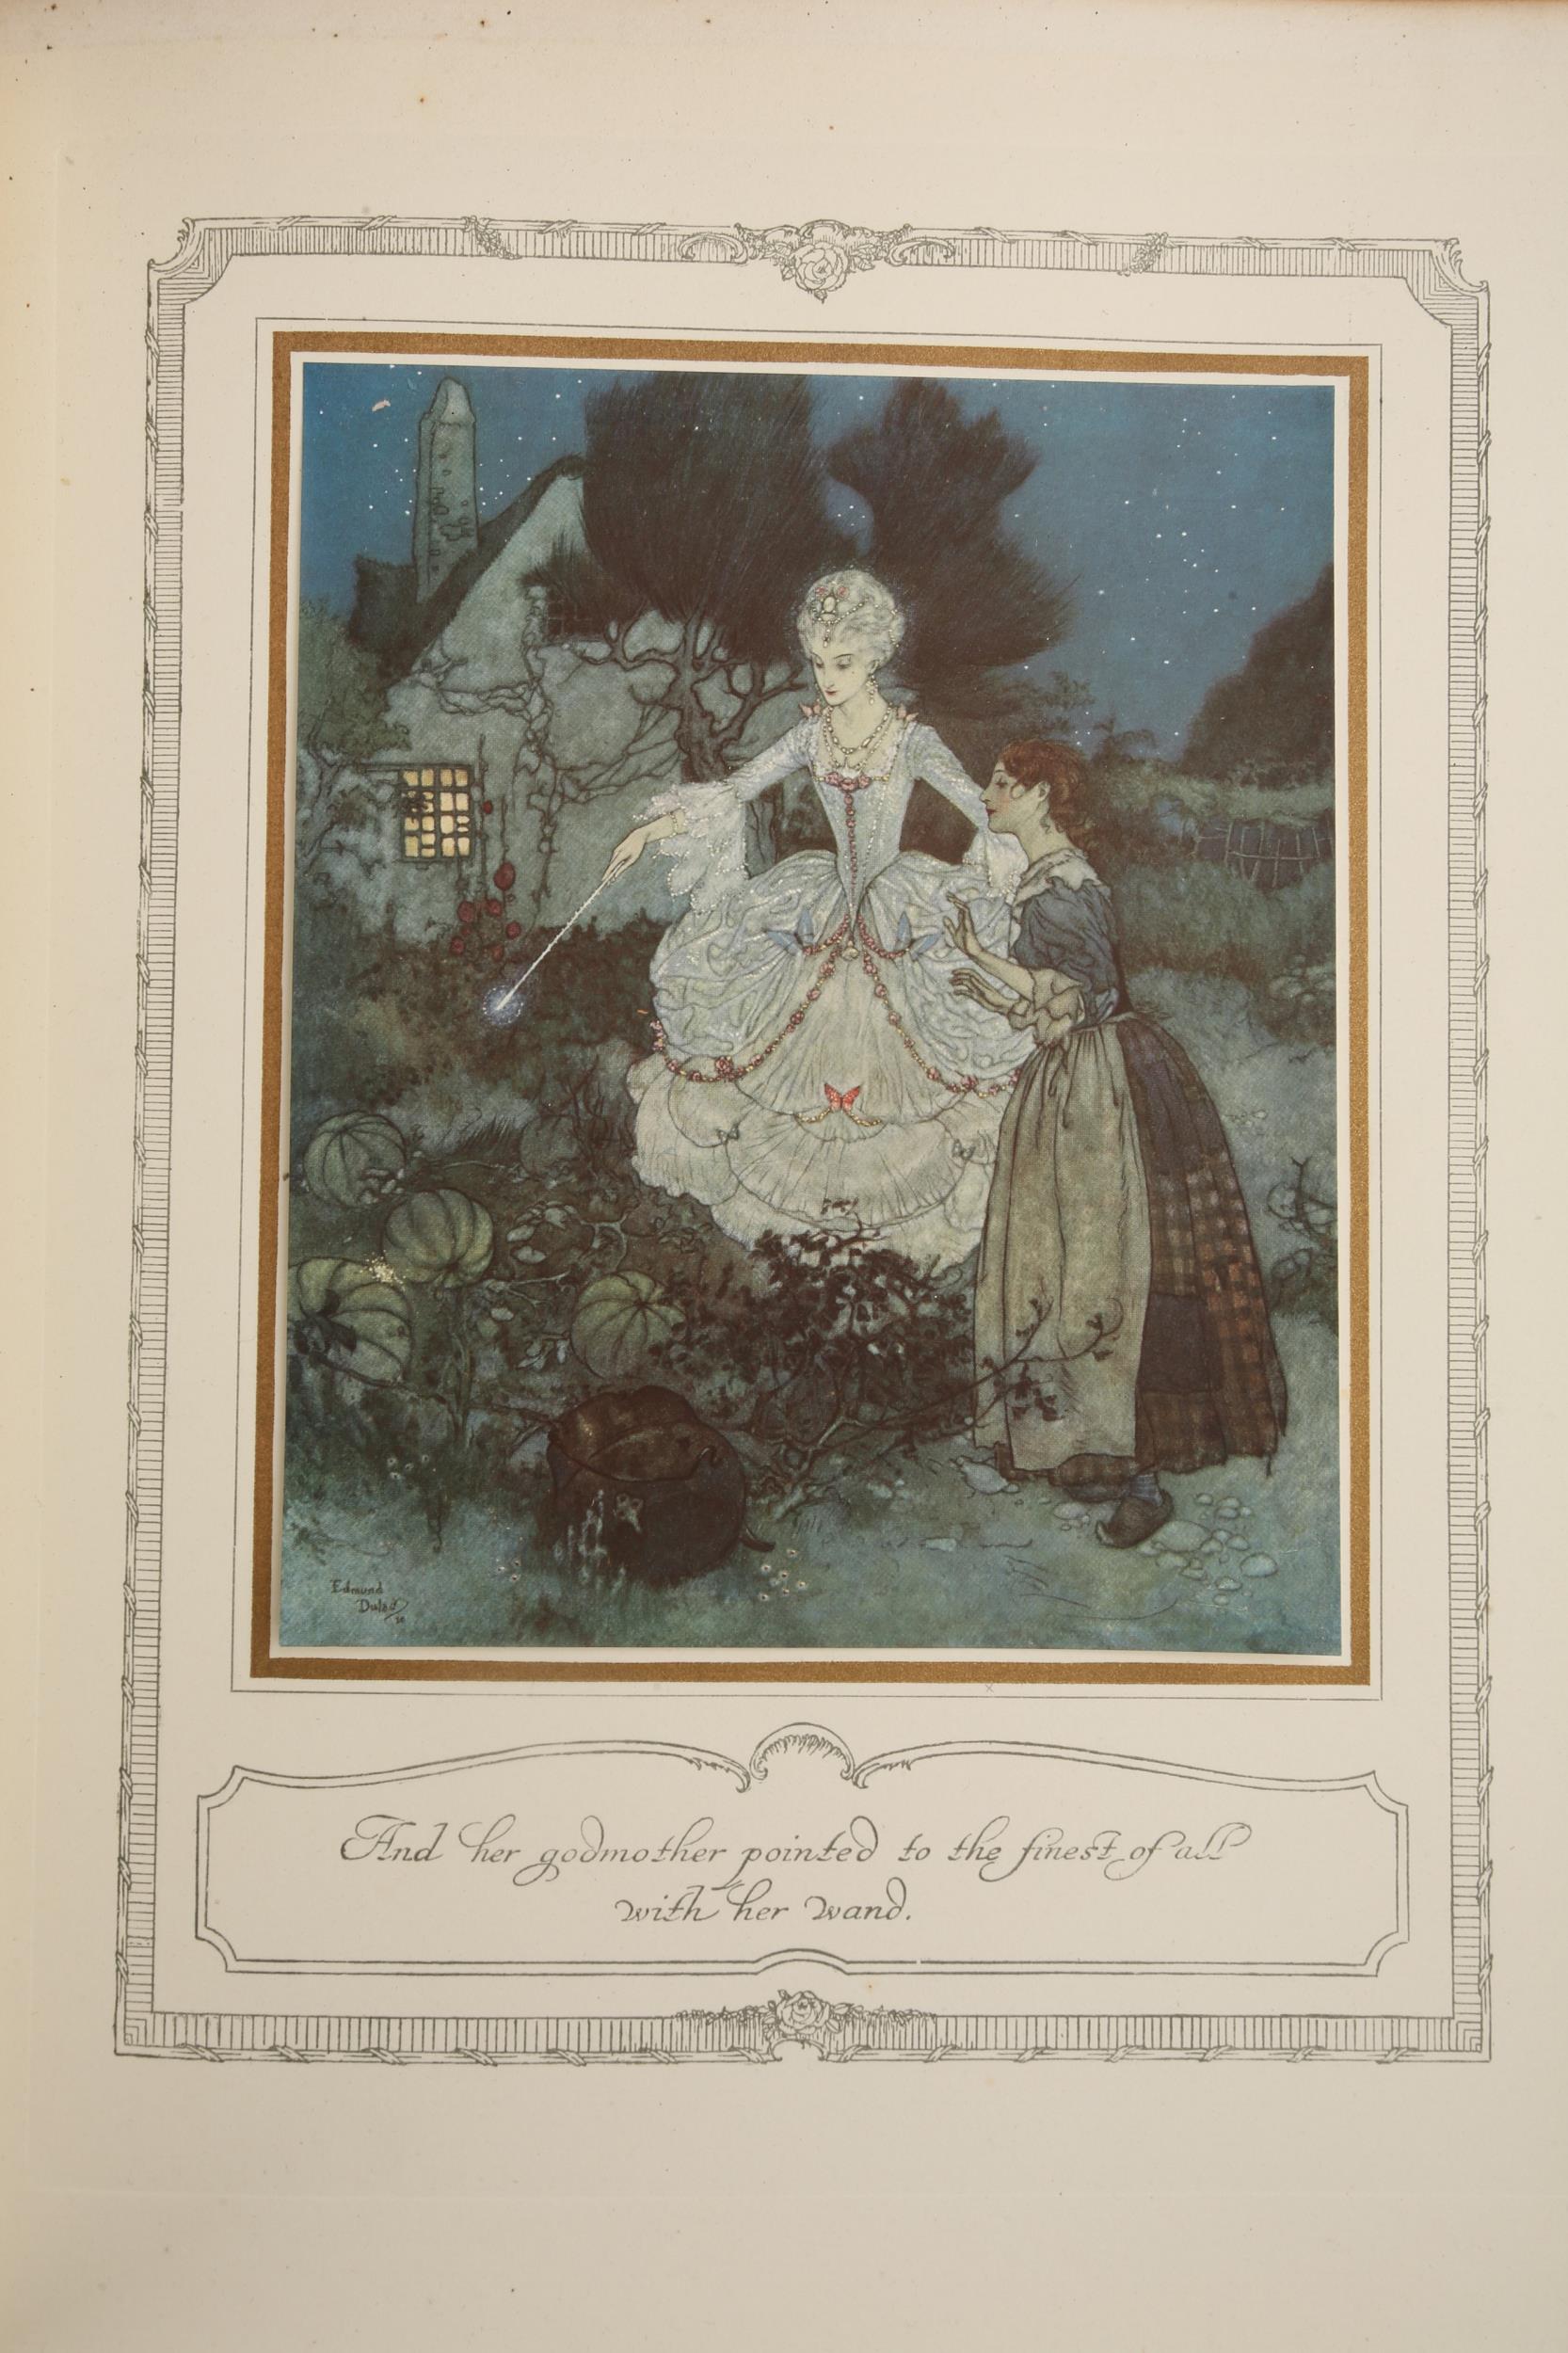 Arthur Quiller-Couch, 'The Sleeping Beauty and Other Fairy Tales', London, Hodder & Stoughton, - Image 17 of 21